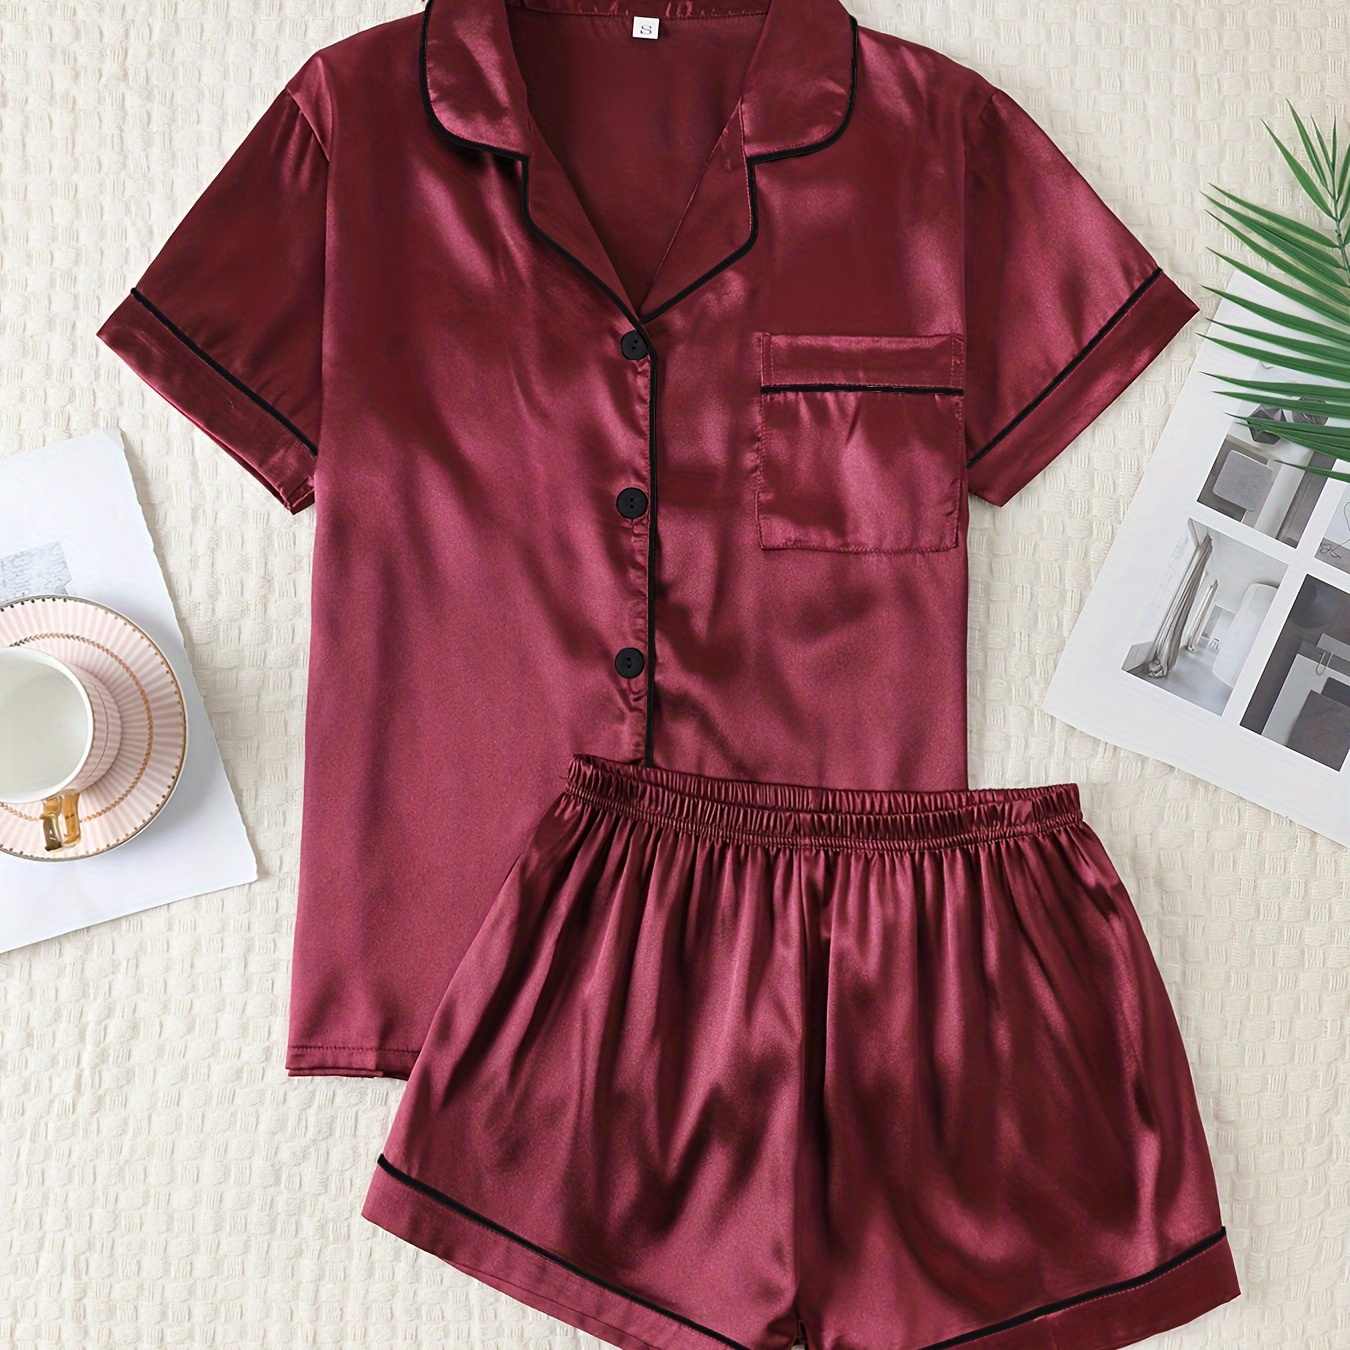 

Women's Casual Solid Satin Pajama Set, Short Sleeve Buttons Lapel Top & Shorts, Comfortable Relaxed Fit, Summer Nightwear